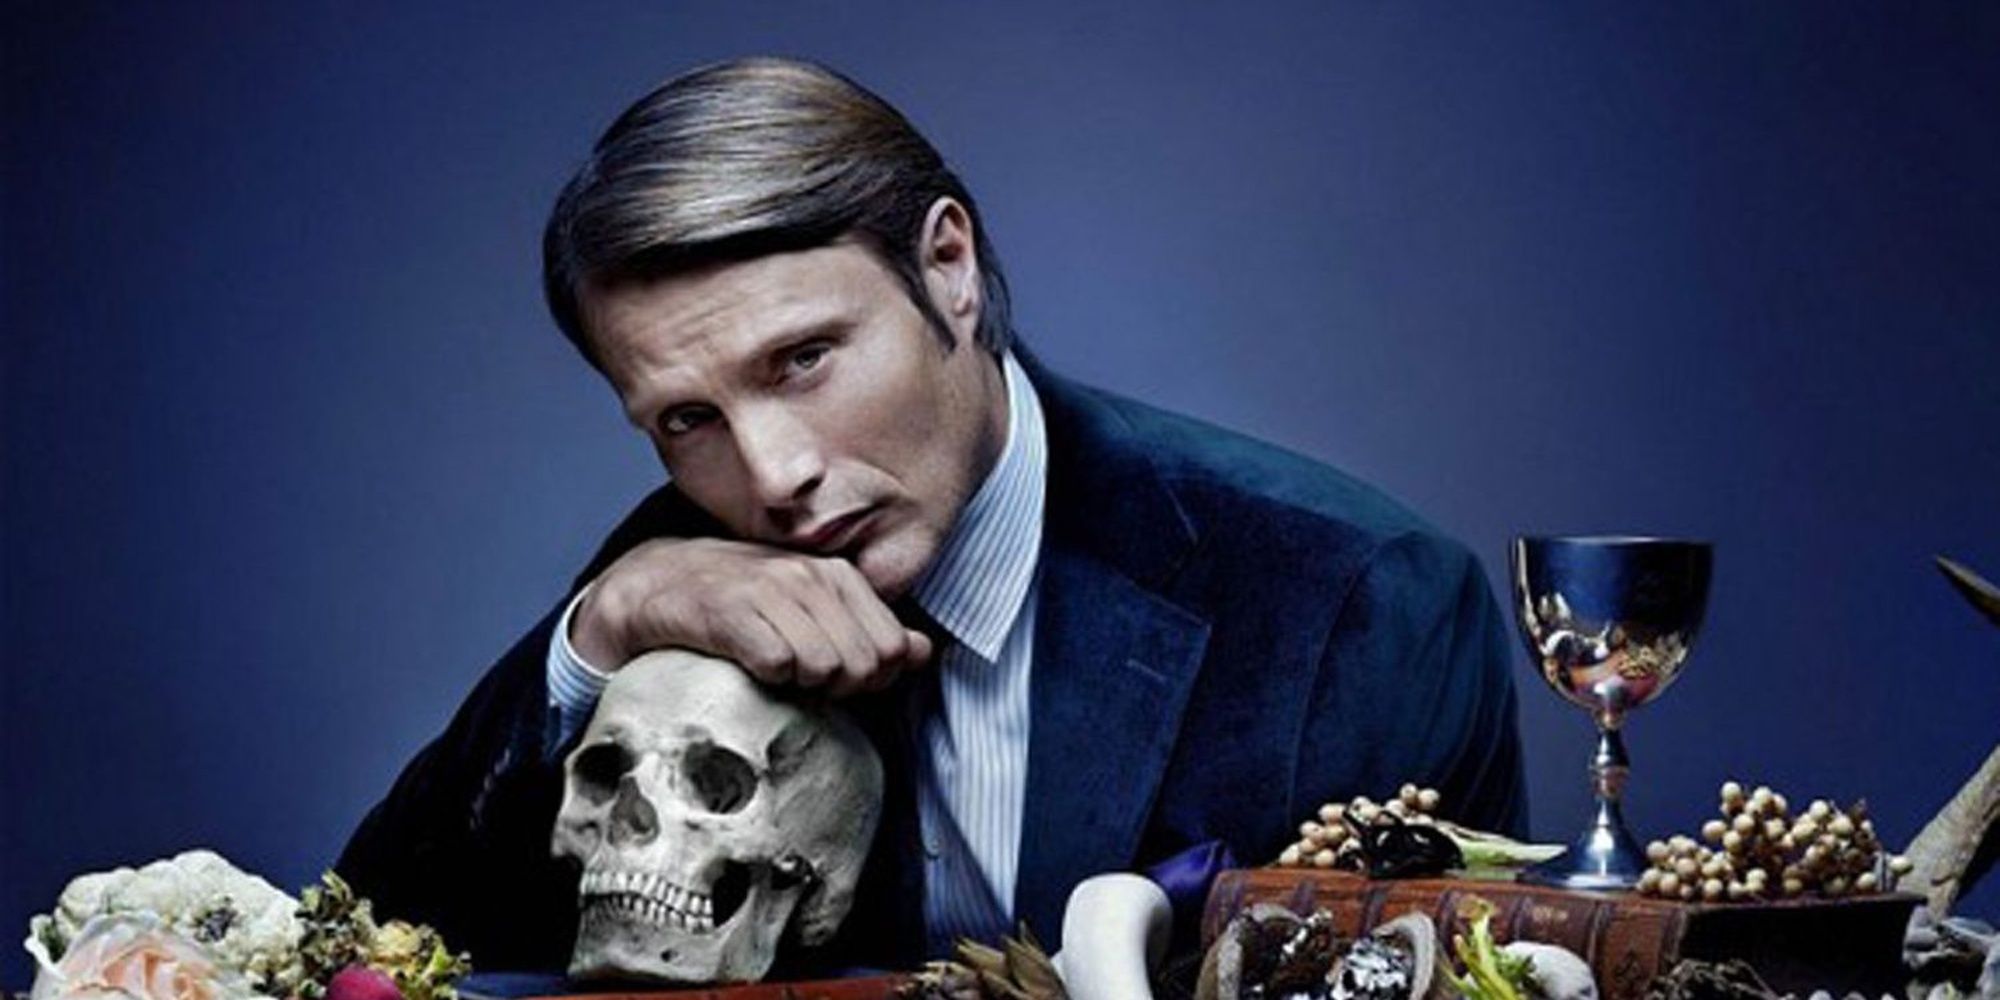 Mads Mikelsen in Hannibal